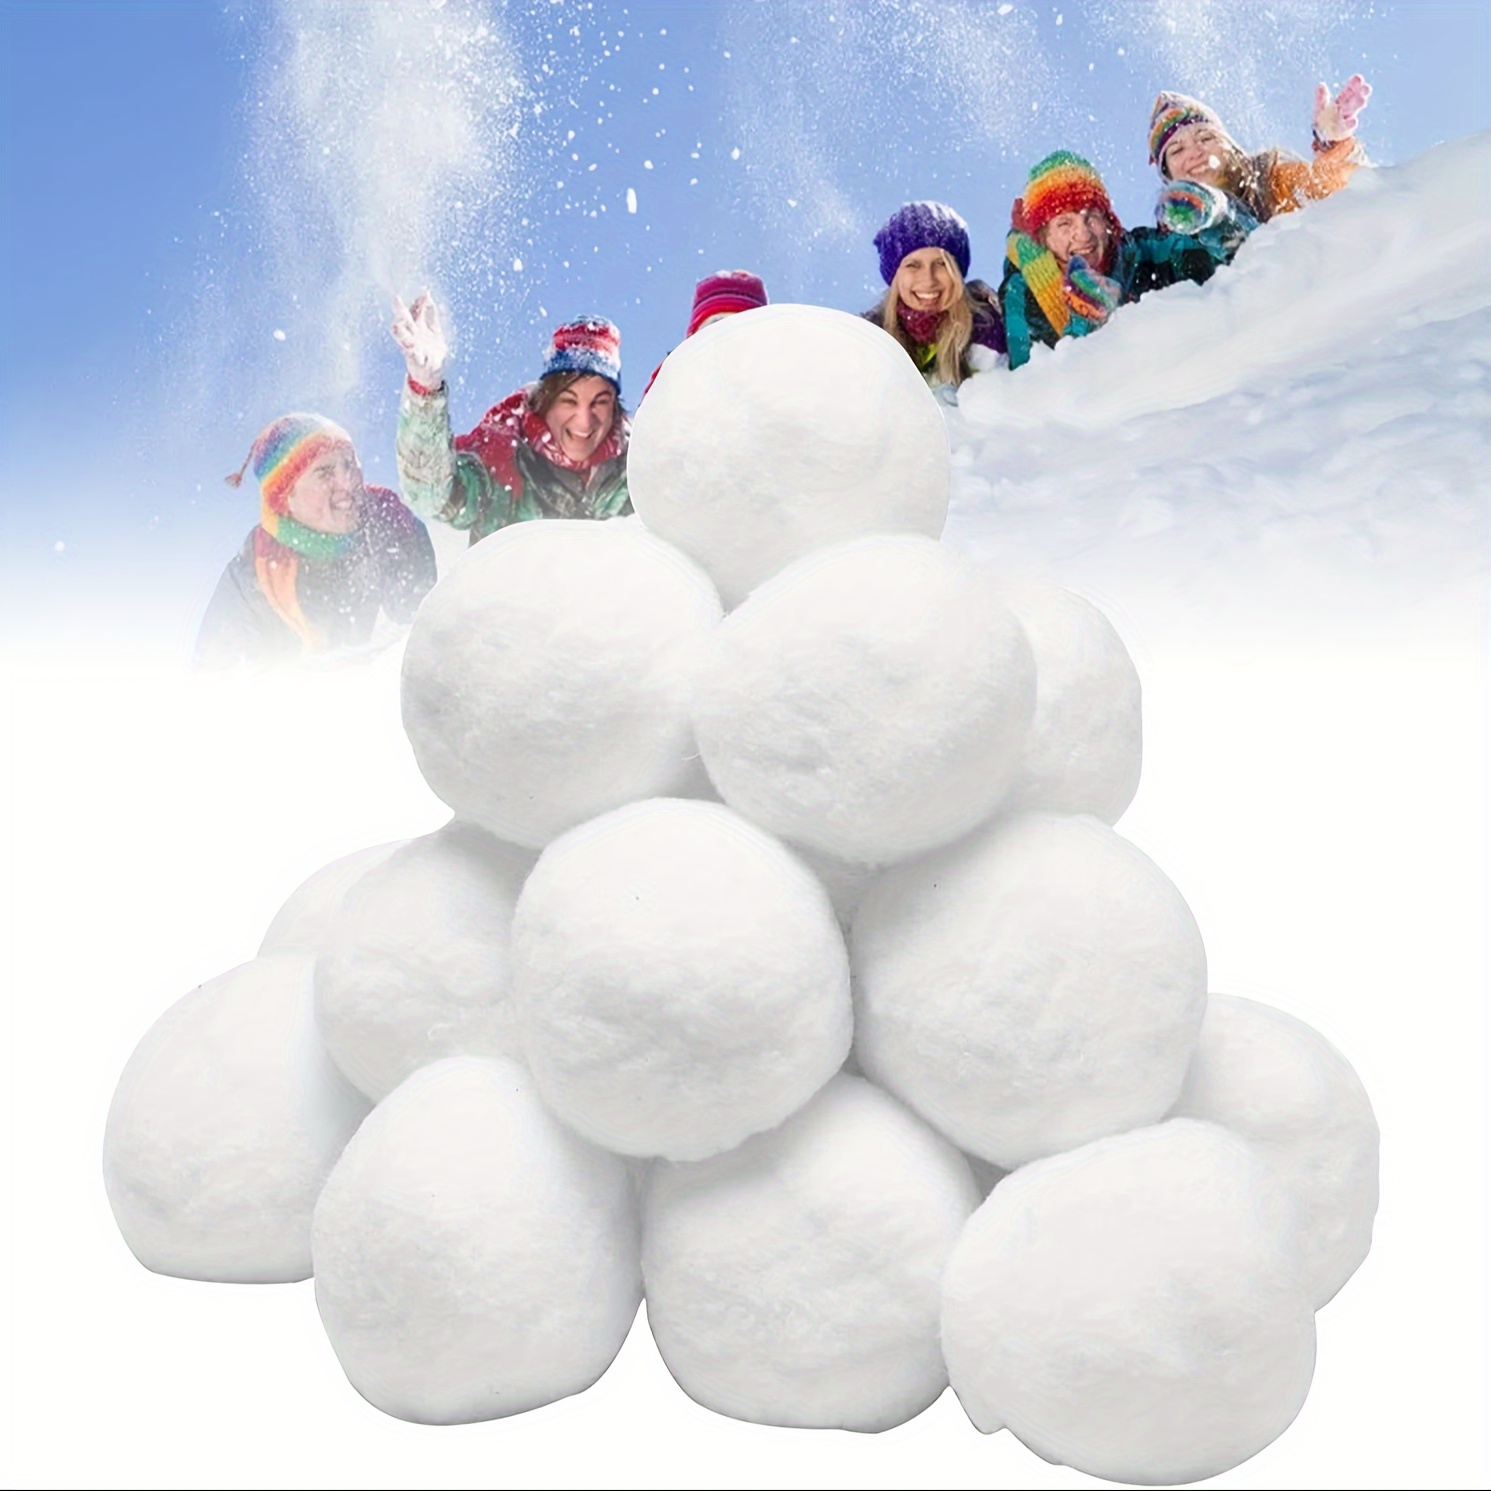 40 Pack Indoor Snowballs for Kids Snow Fight,Fake Snowballs Xmas Decoration,Realistic White Plush Snowballs for Kids Adults Game, Size: 2.6